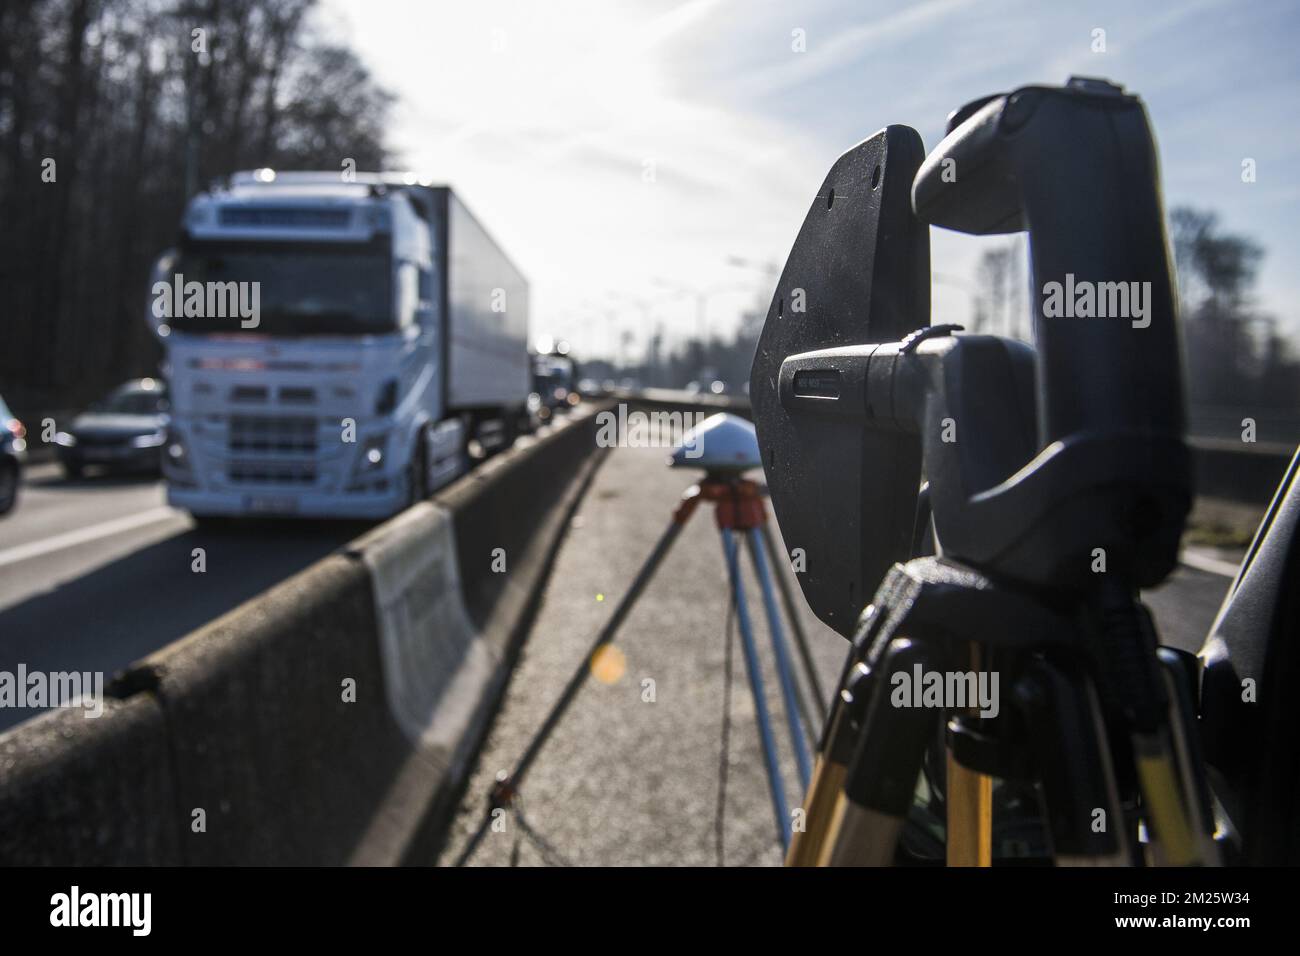 Illustration picture shows a control on fraud on the kilometer tax by Viapass, the government organization that monitors and controls the kilometer tax, Tuesday 14 March 2017, at Carrefour Leonard - Leonardkruispunt in Brussels. On 01 April 216, the Flemish, Walloon and Brussels Capital regions introduced a kilometer tax for trucks weighting more than 3.5 tons. Belgian and foreign trucks must have an OBU, On Board Unit, when driving on public roads in Belgium. BELGA PHOTO LAURIE DIEFFEMBACQ  Stock Photo